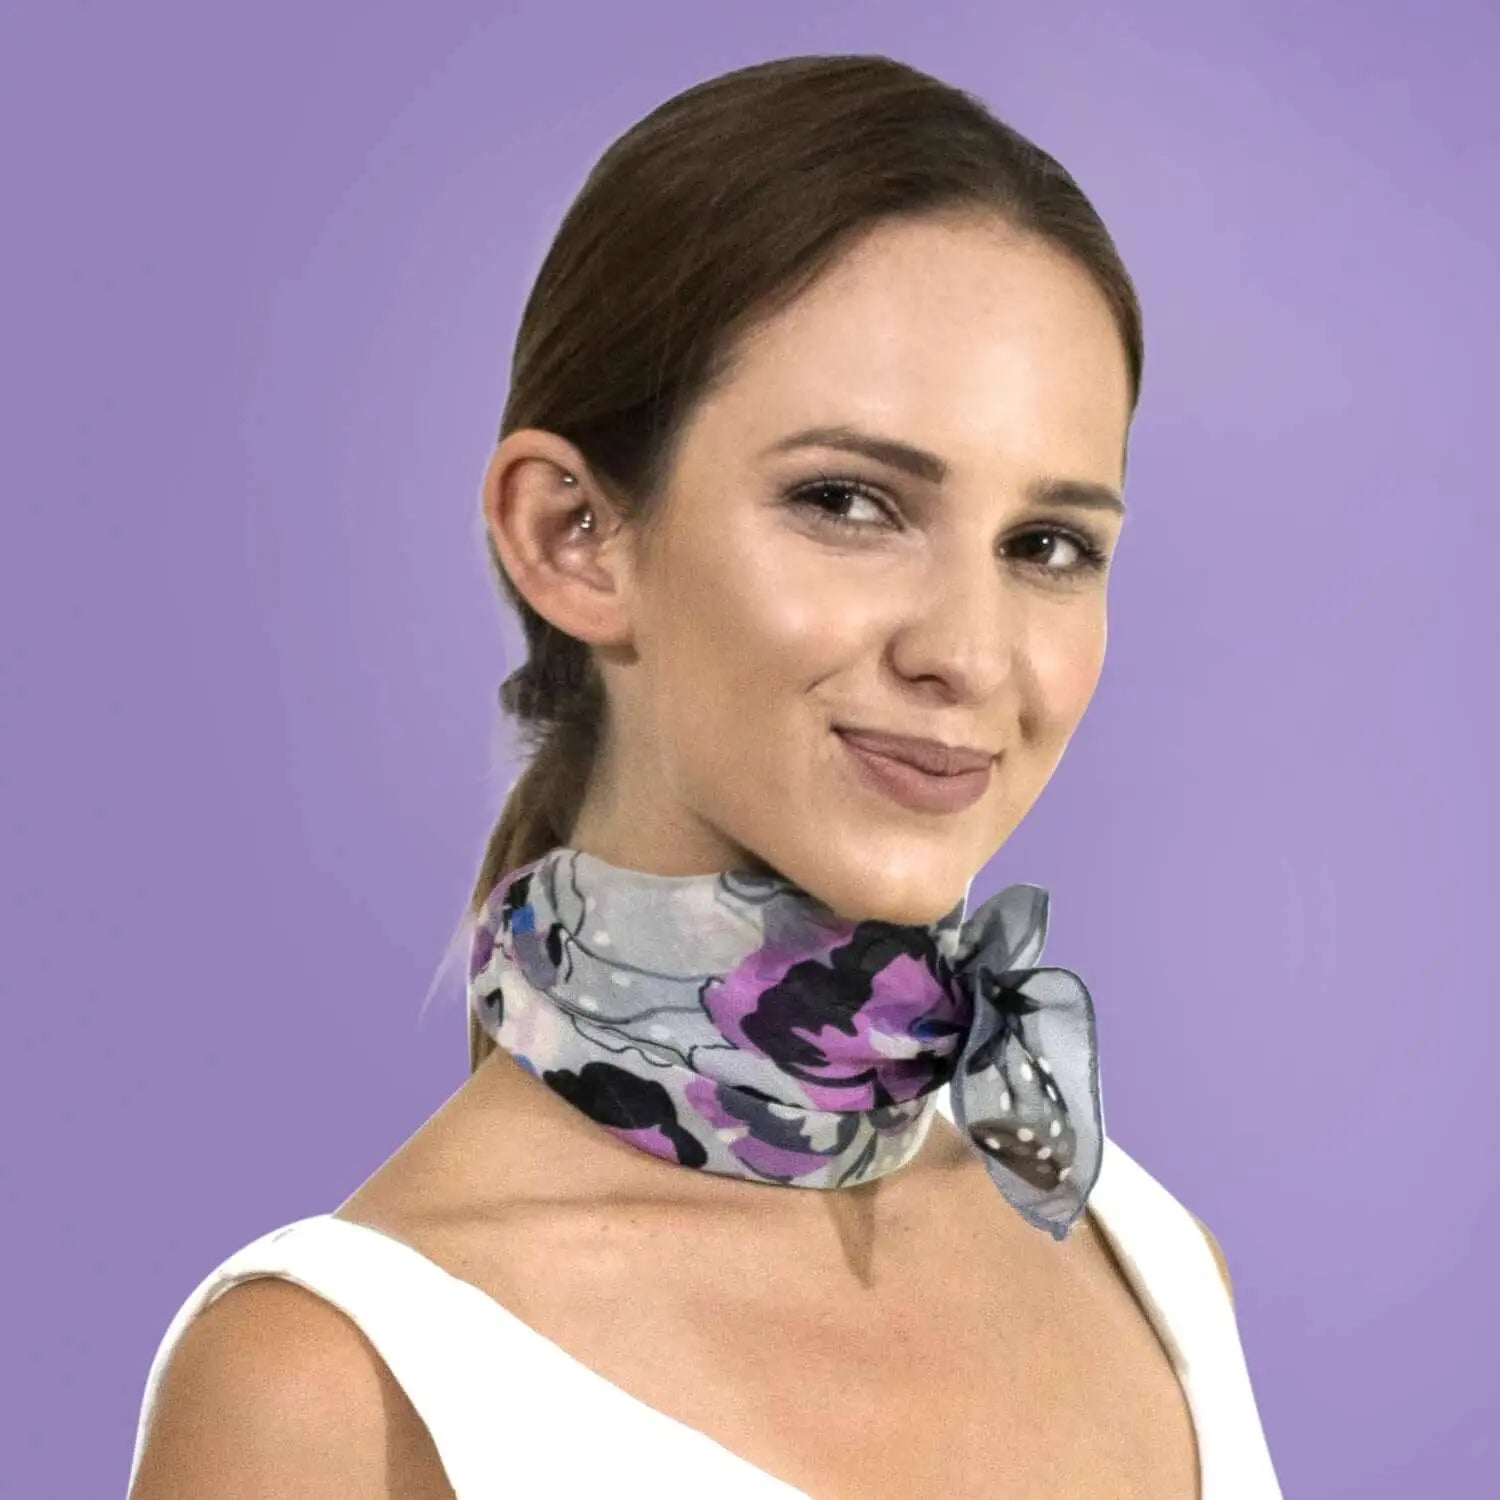 Woman wearing purple and black floral print small square scarf.